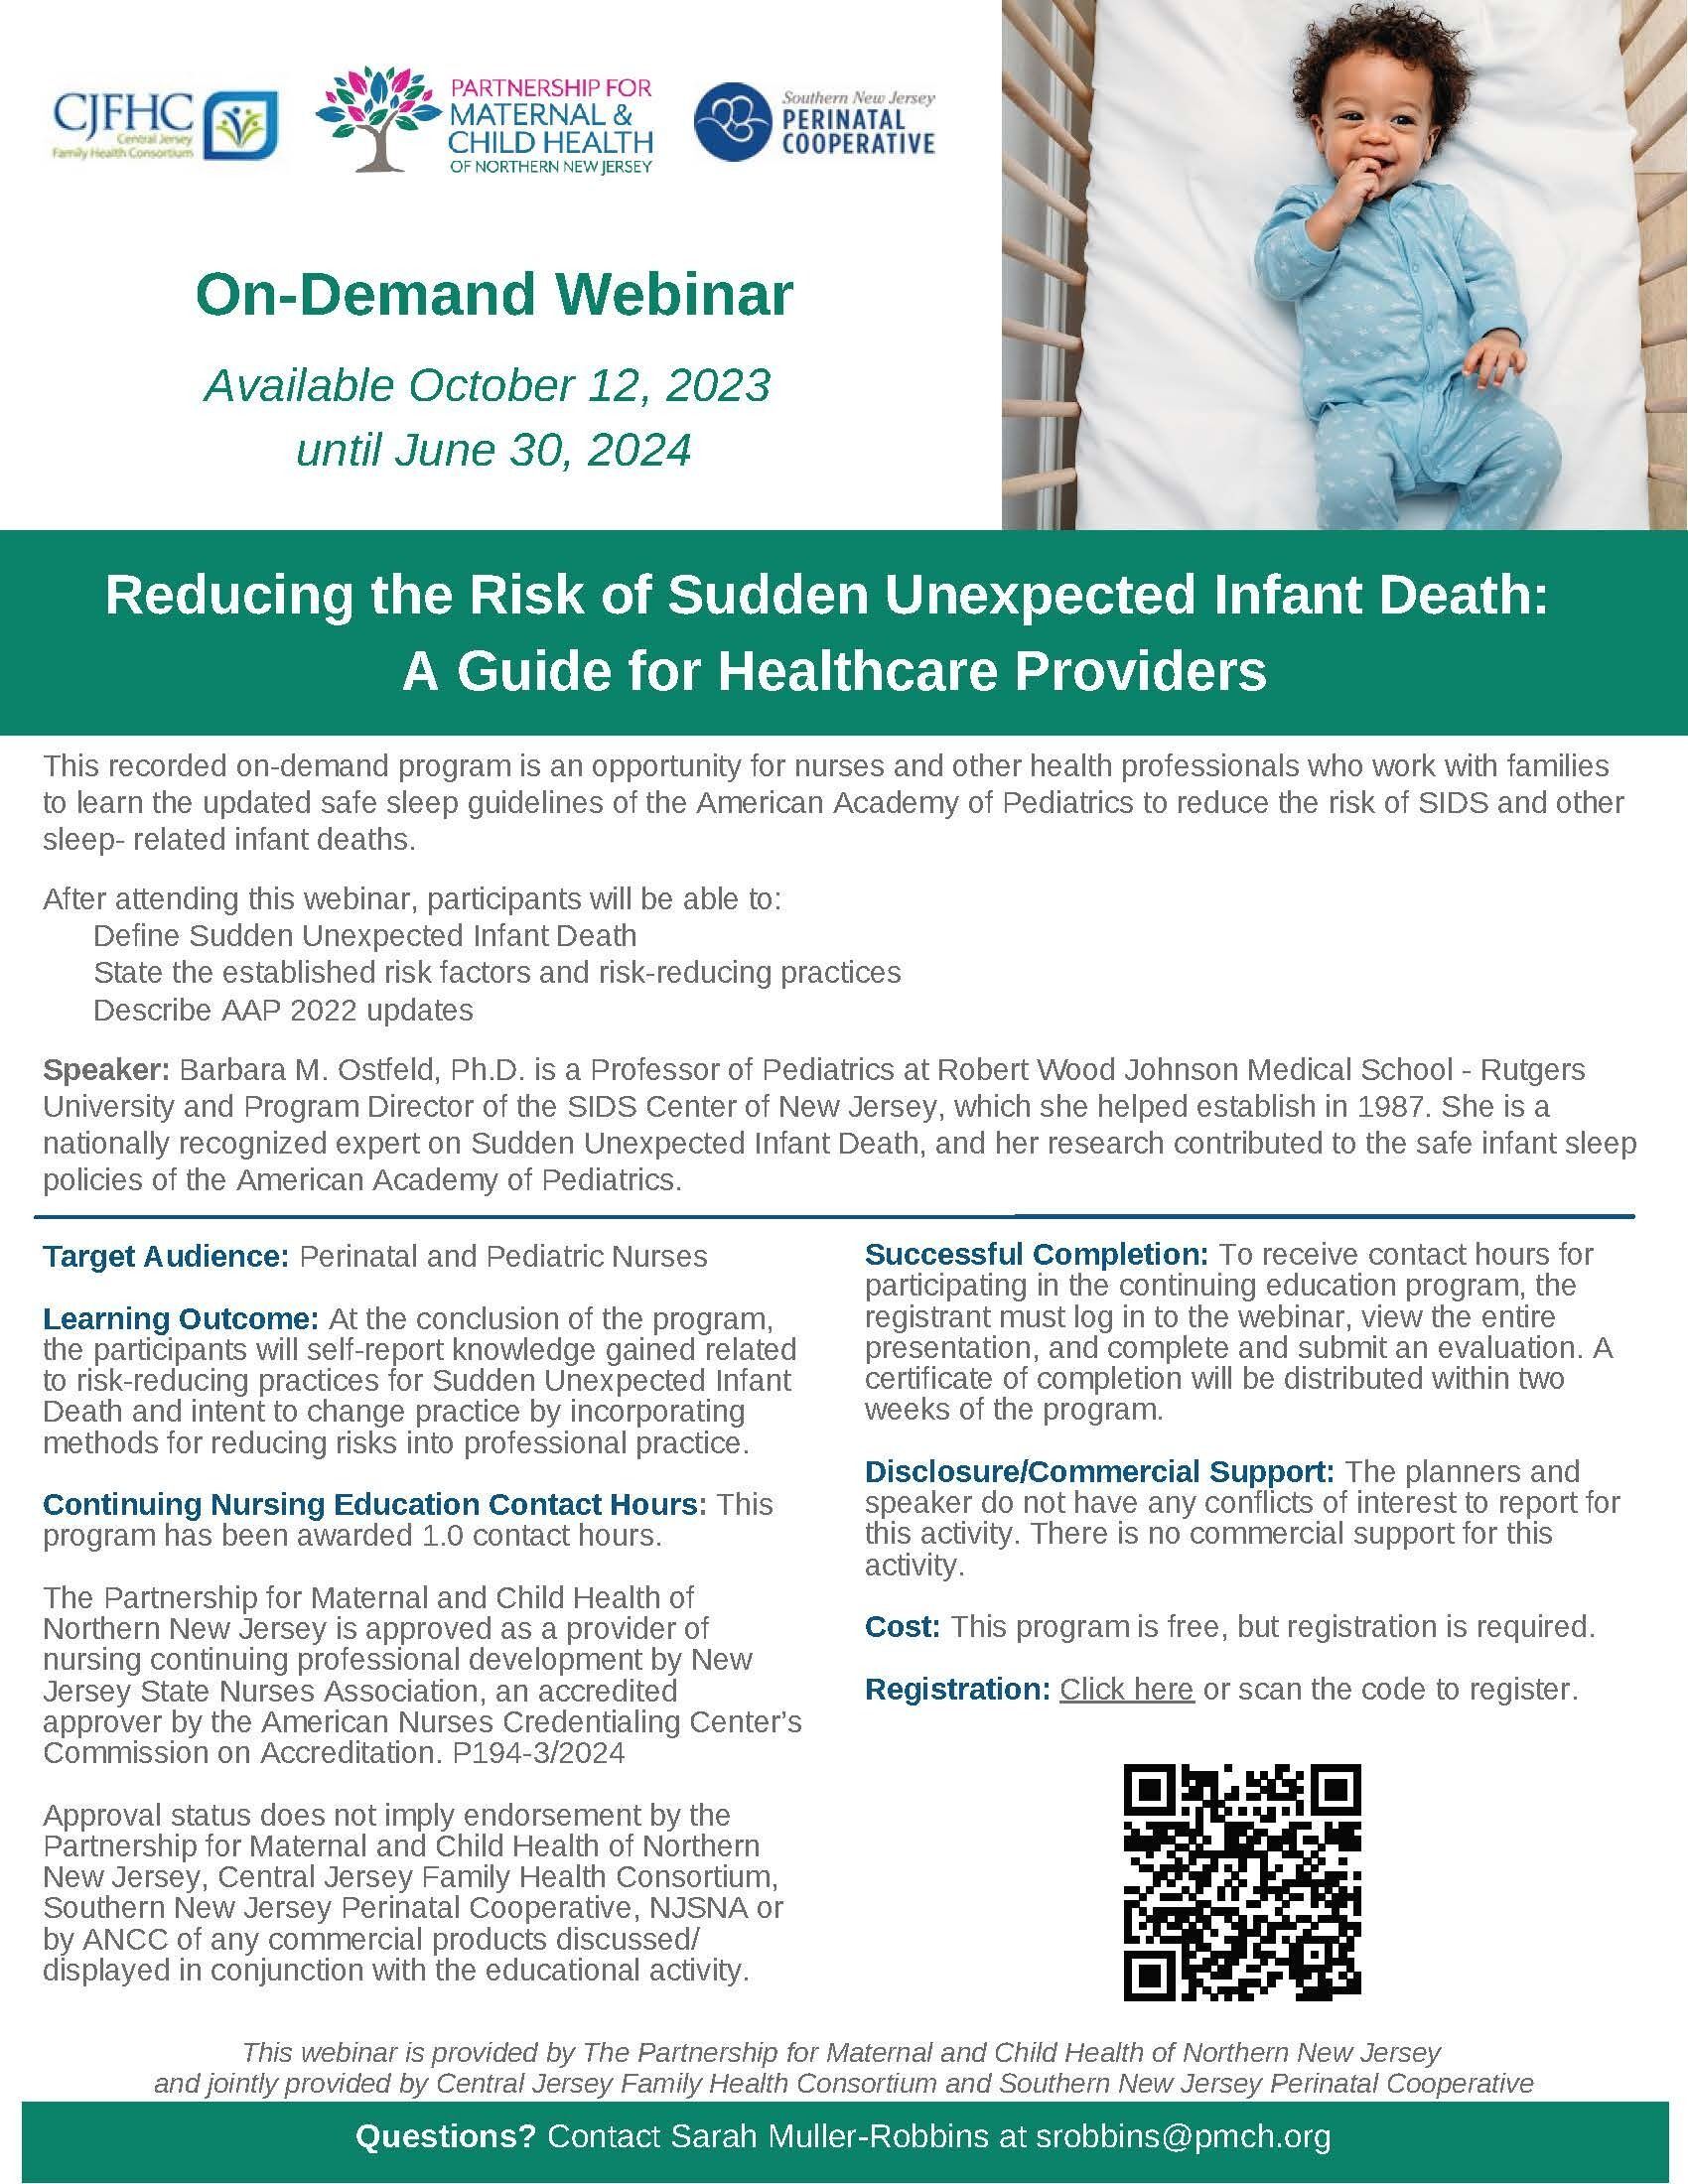 Reducing the Risk of Sudden Unexpected Infant Death: A Guide for Healthcare Providers Flyer